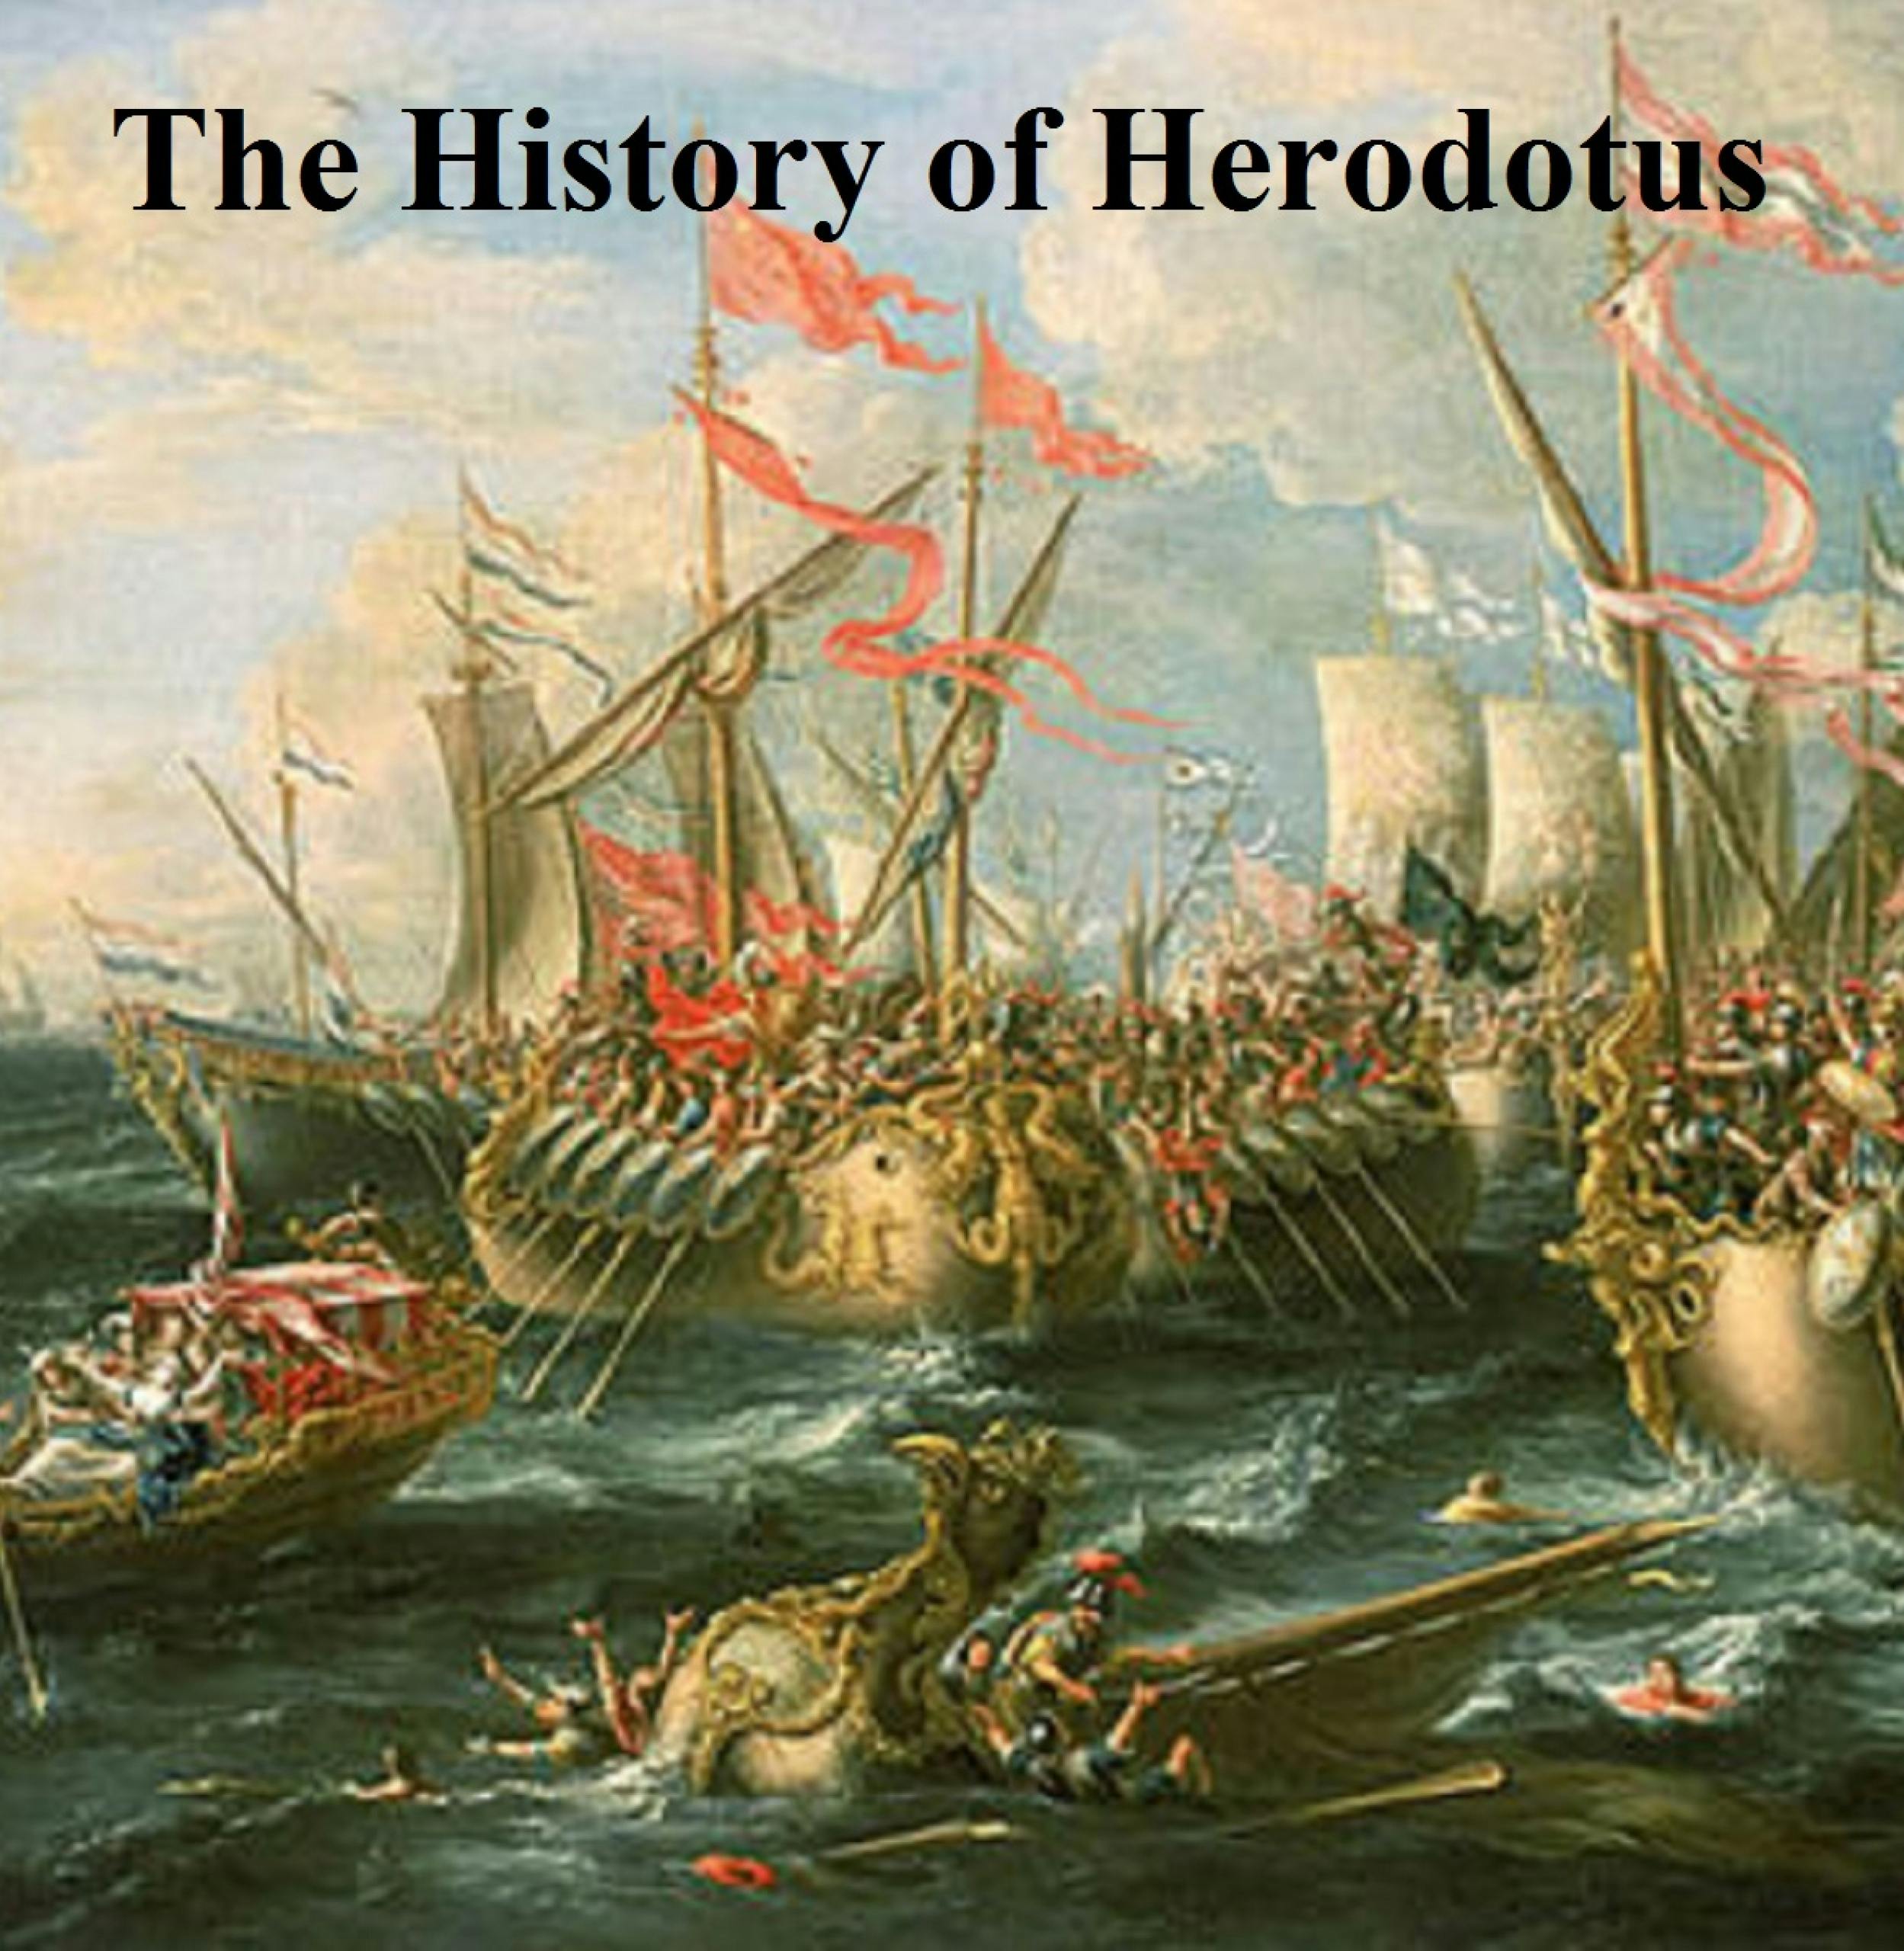 The History of Herodotus - undefined